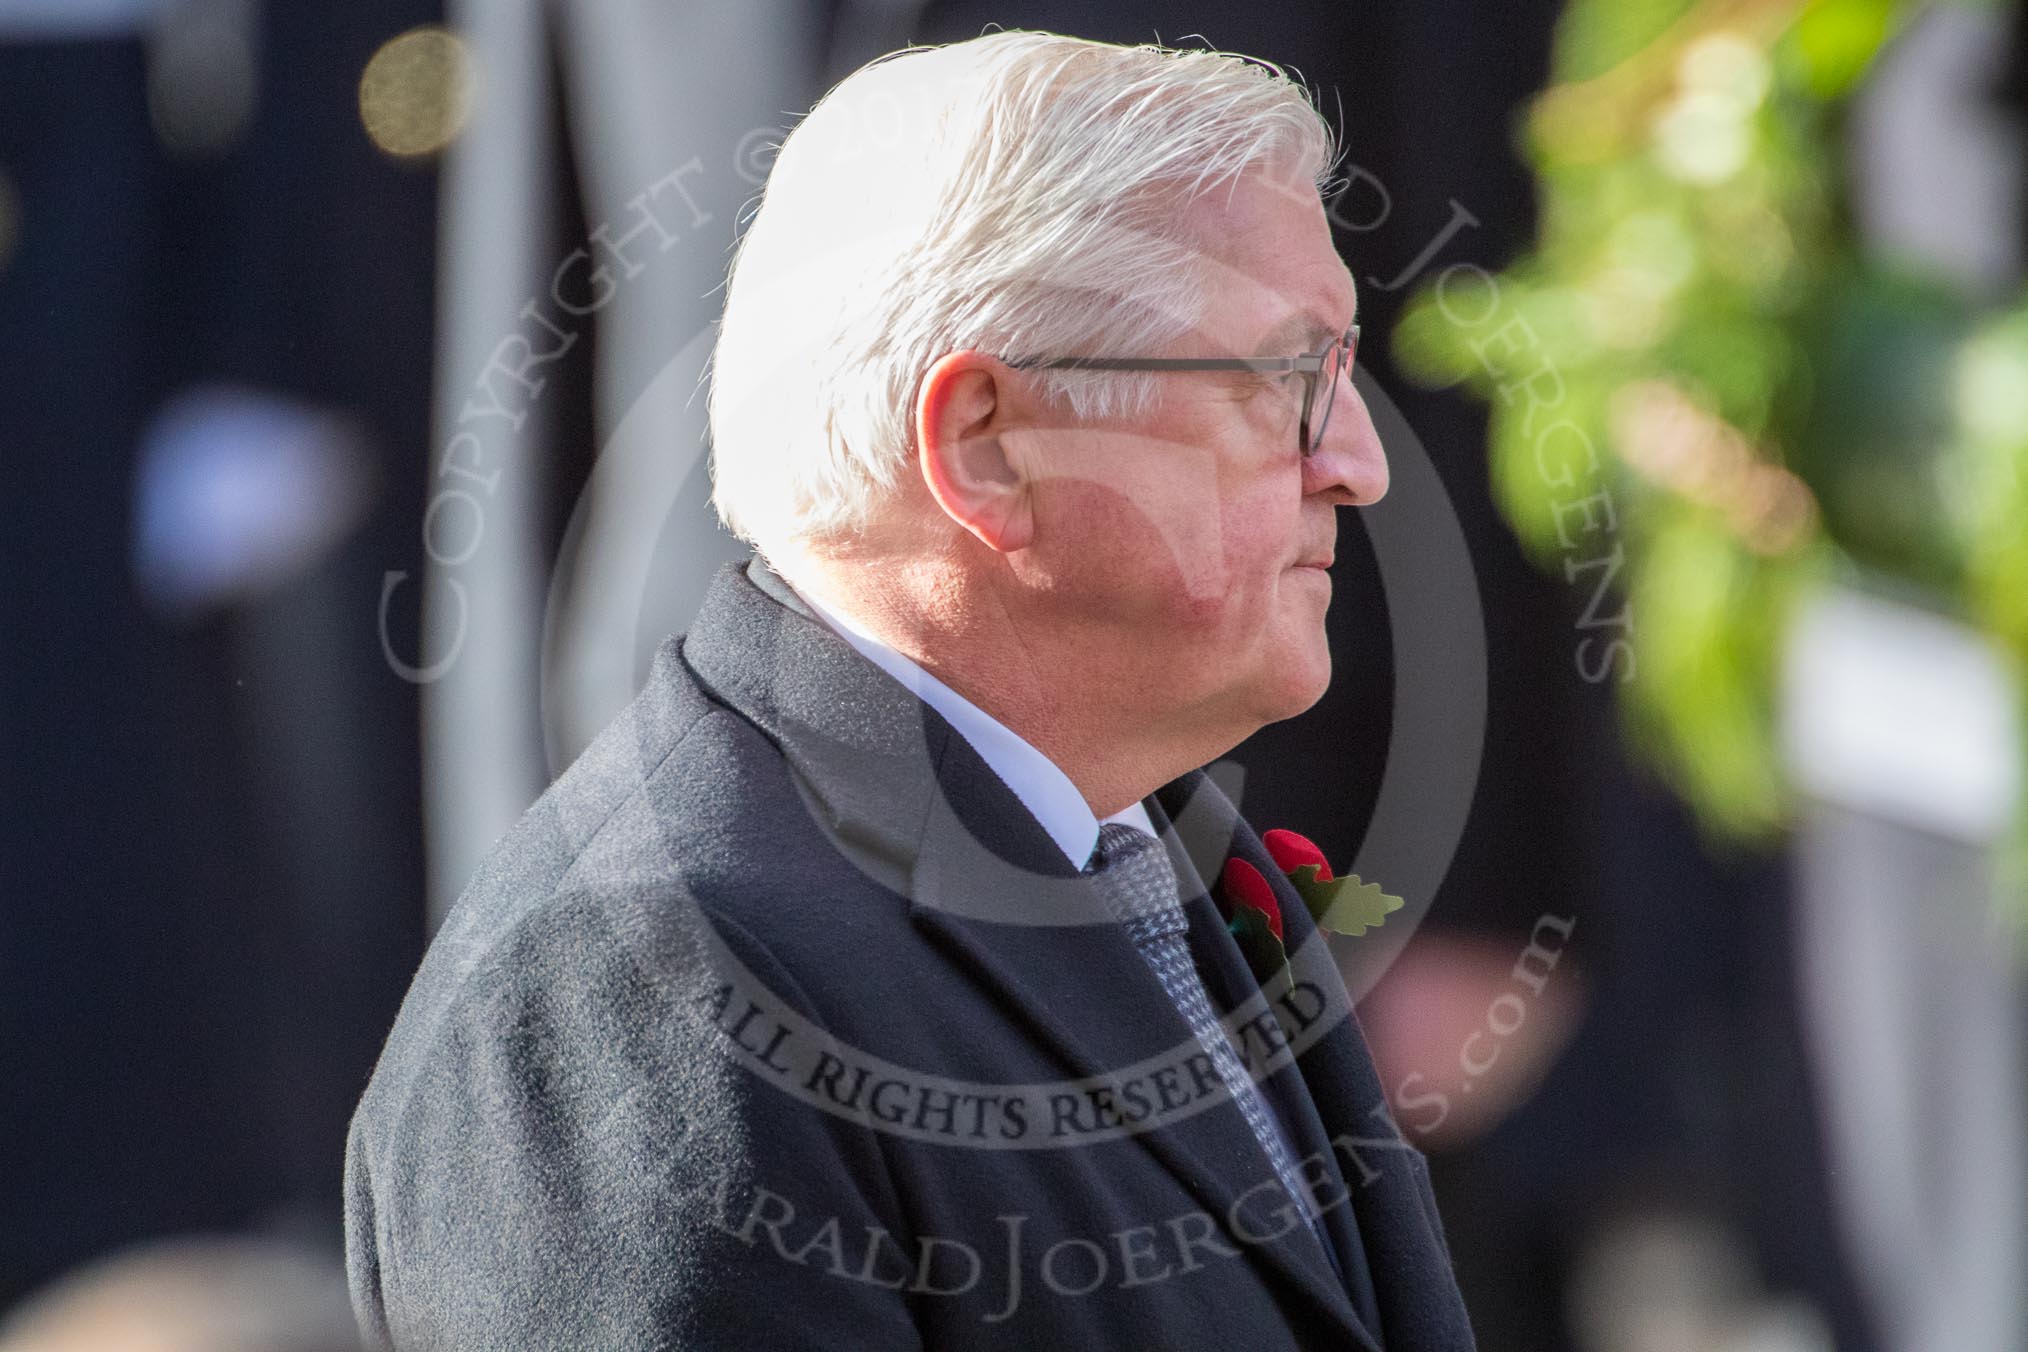 HE The President of the Federal Republic of Germany, Frank-Walter Steinmeier after laying his wreath at the Cenotaph during the Remembrance Sunday Cenotaph Ceremony 2018 at Horse Guards Parade, Westminster, London, 11 November 2018, 11:05.